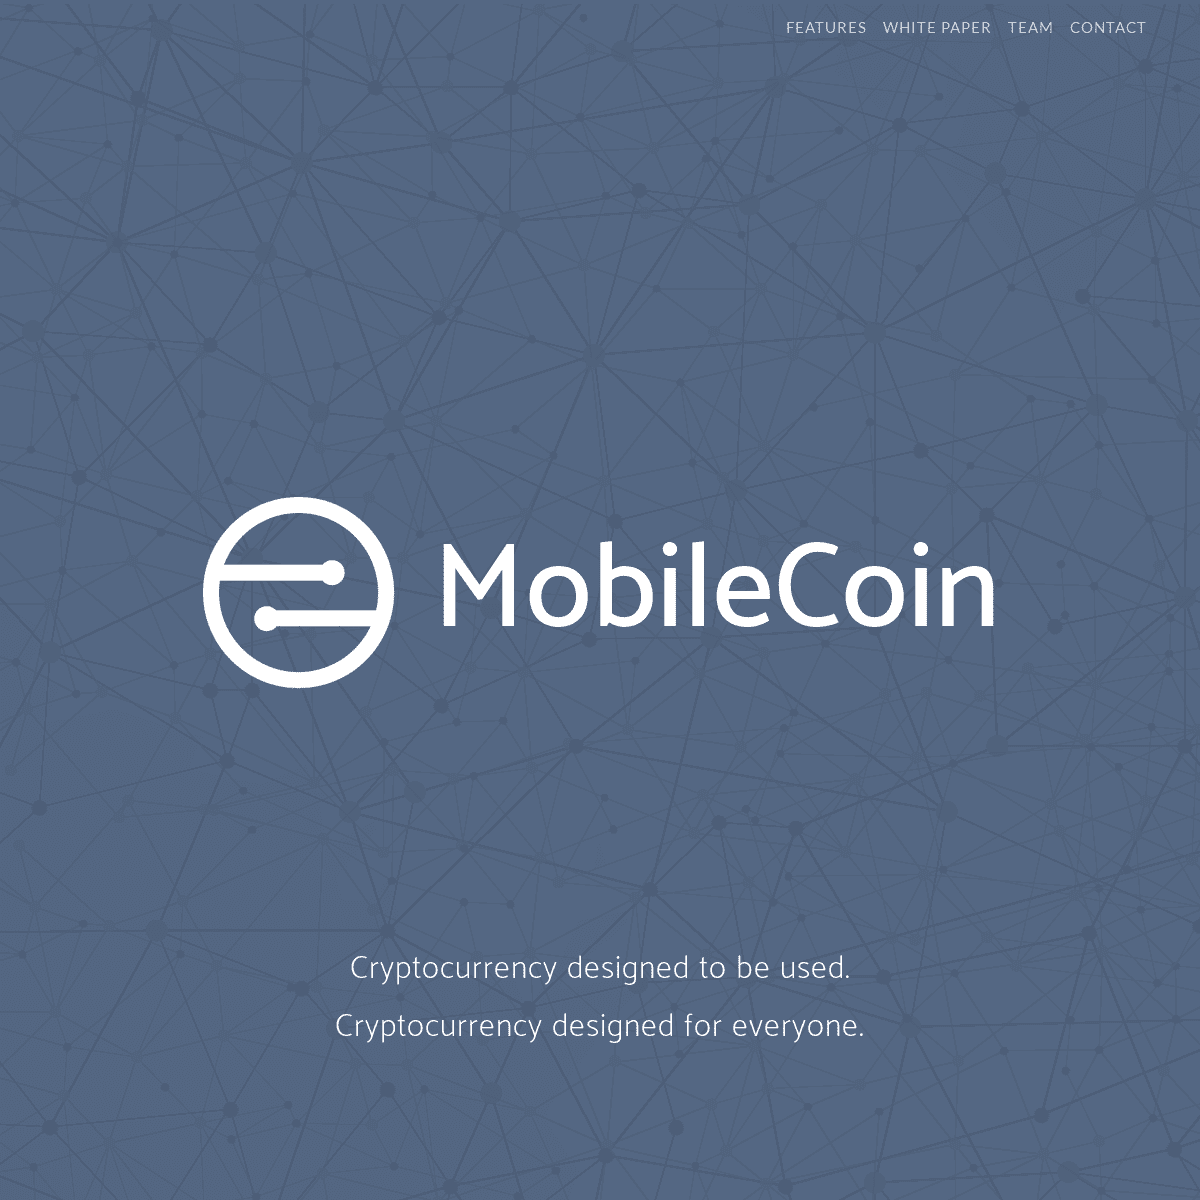 A complete backup of mobilecoin.com